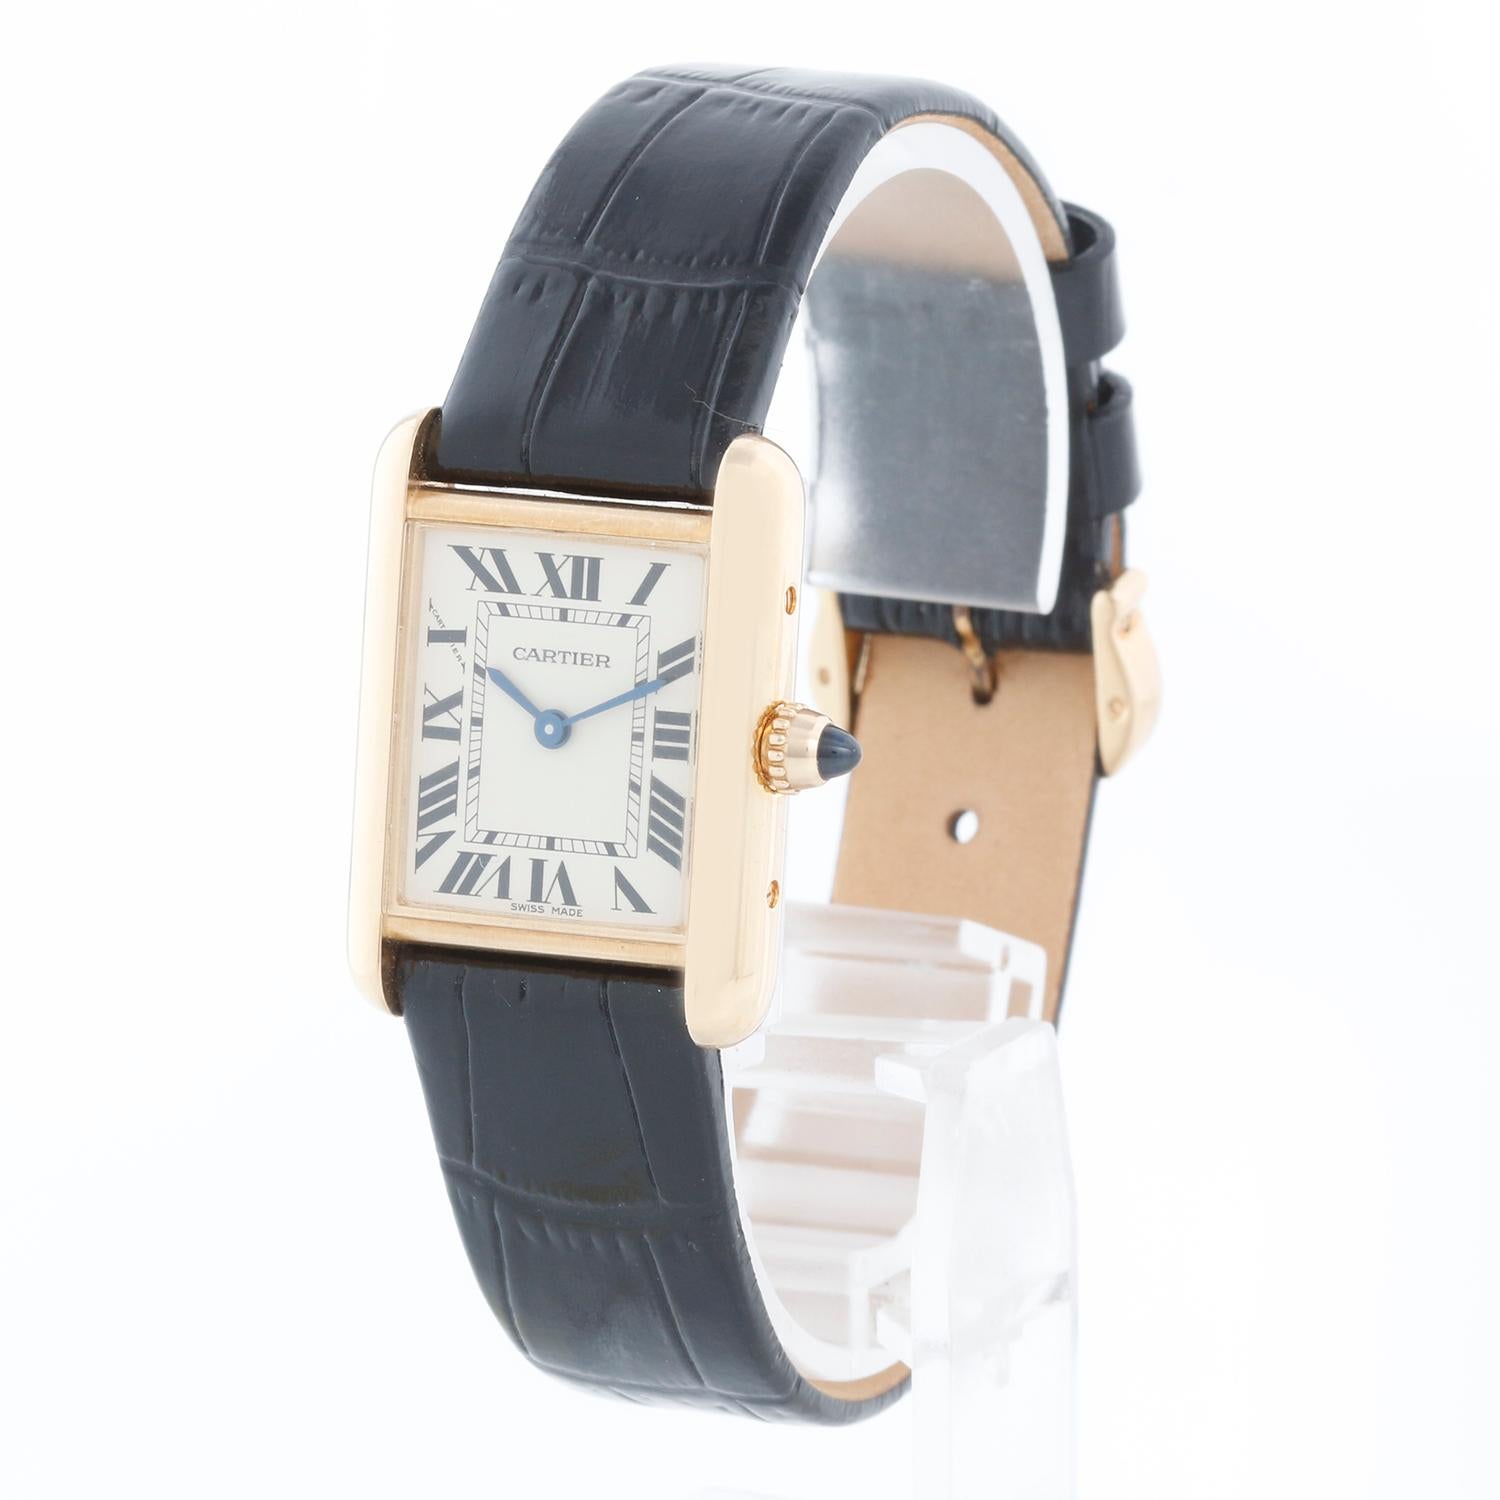 Cartier Tank 18k Yellow Gold Ladies Watch on Leather Band 2442 W1529856 - Quartz. 18k yellow gold case (22mm x 30mm). Ivory colored dial with black Roman numerals. Black strap band with 18k yellow gold Cartier buckle. Pre-owned with custom box. 